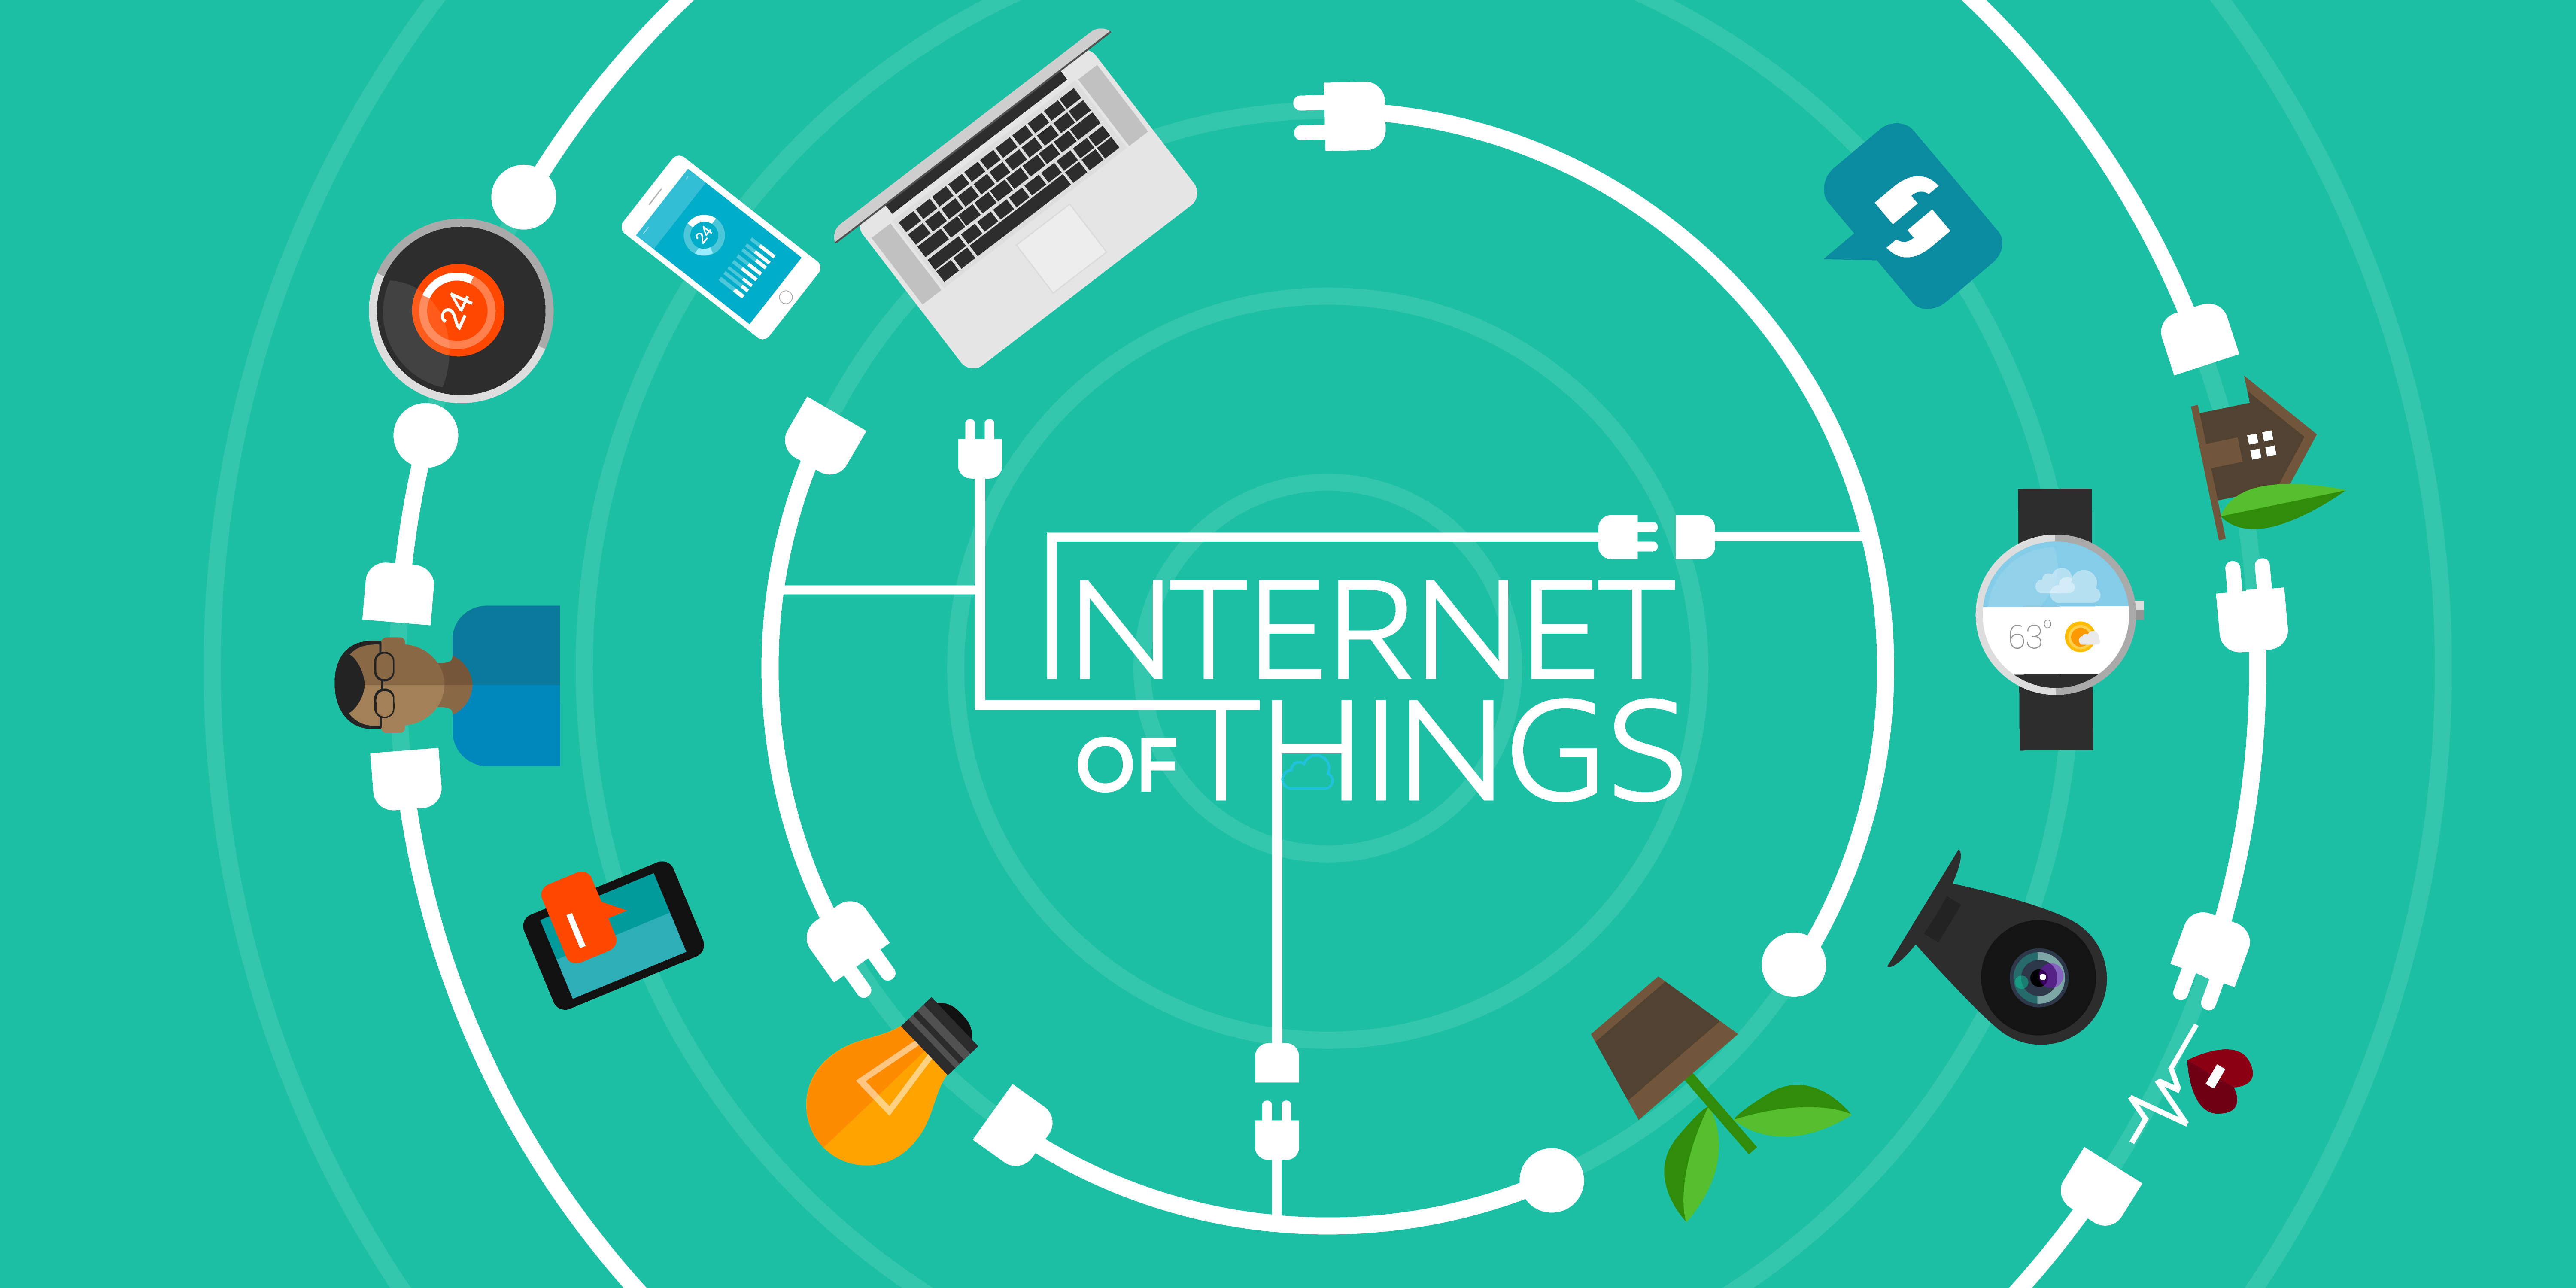 A life cycle approach for IoT security